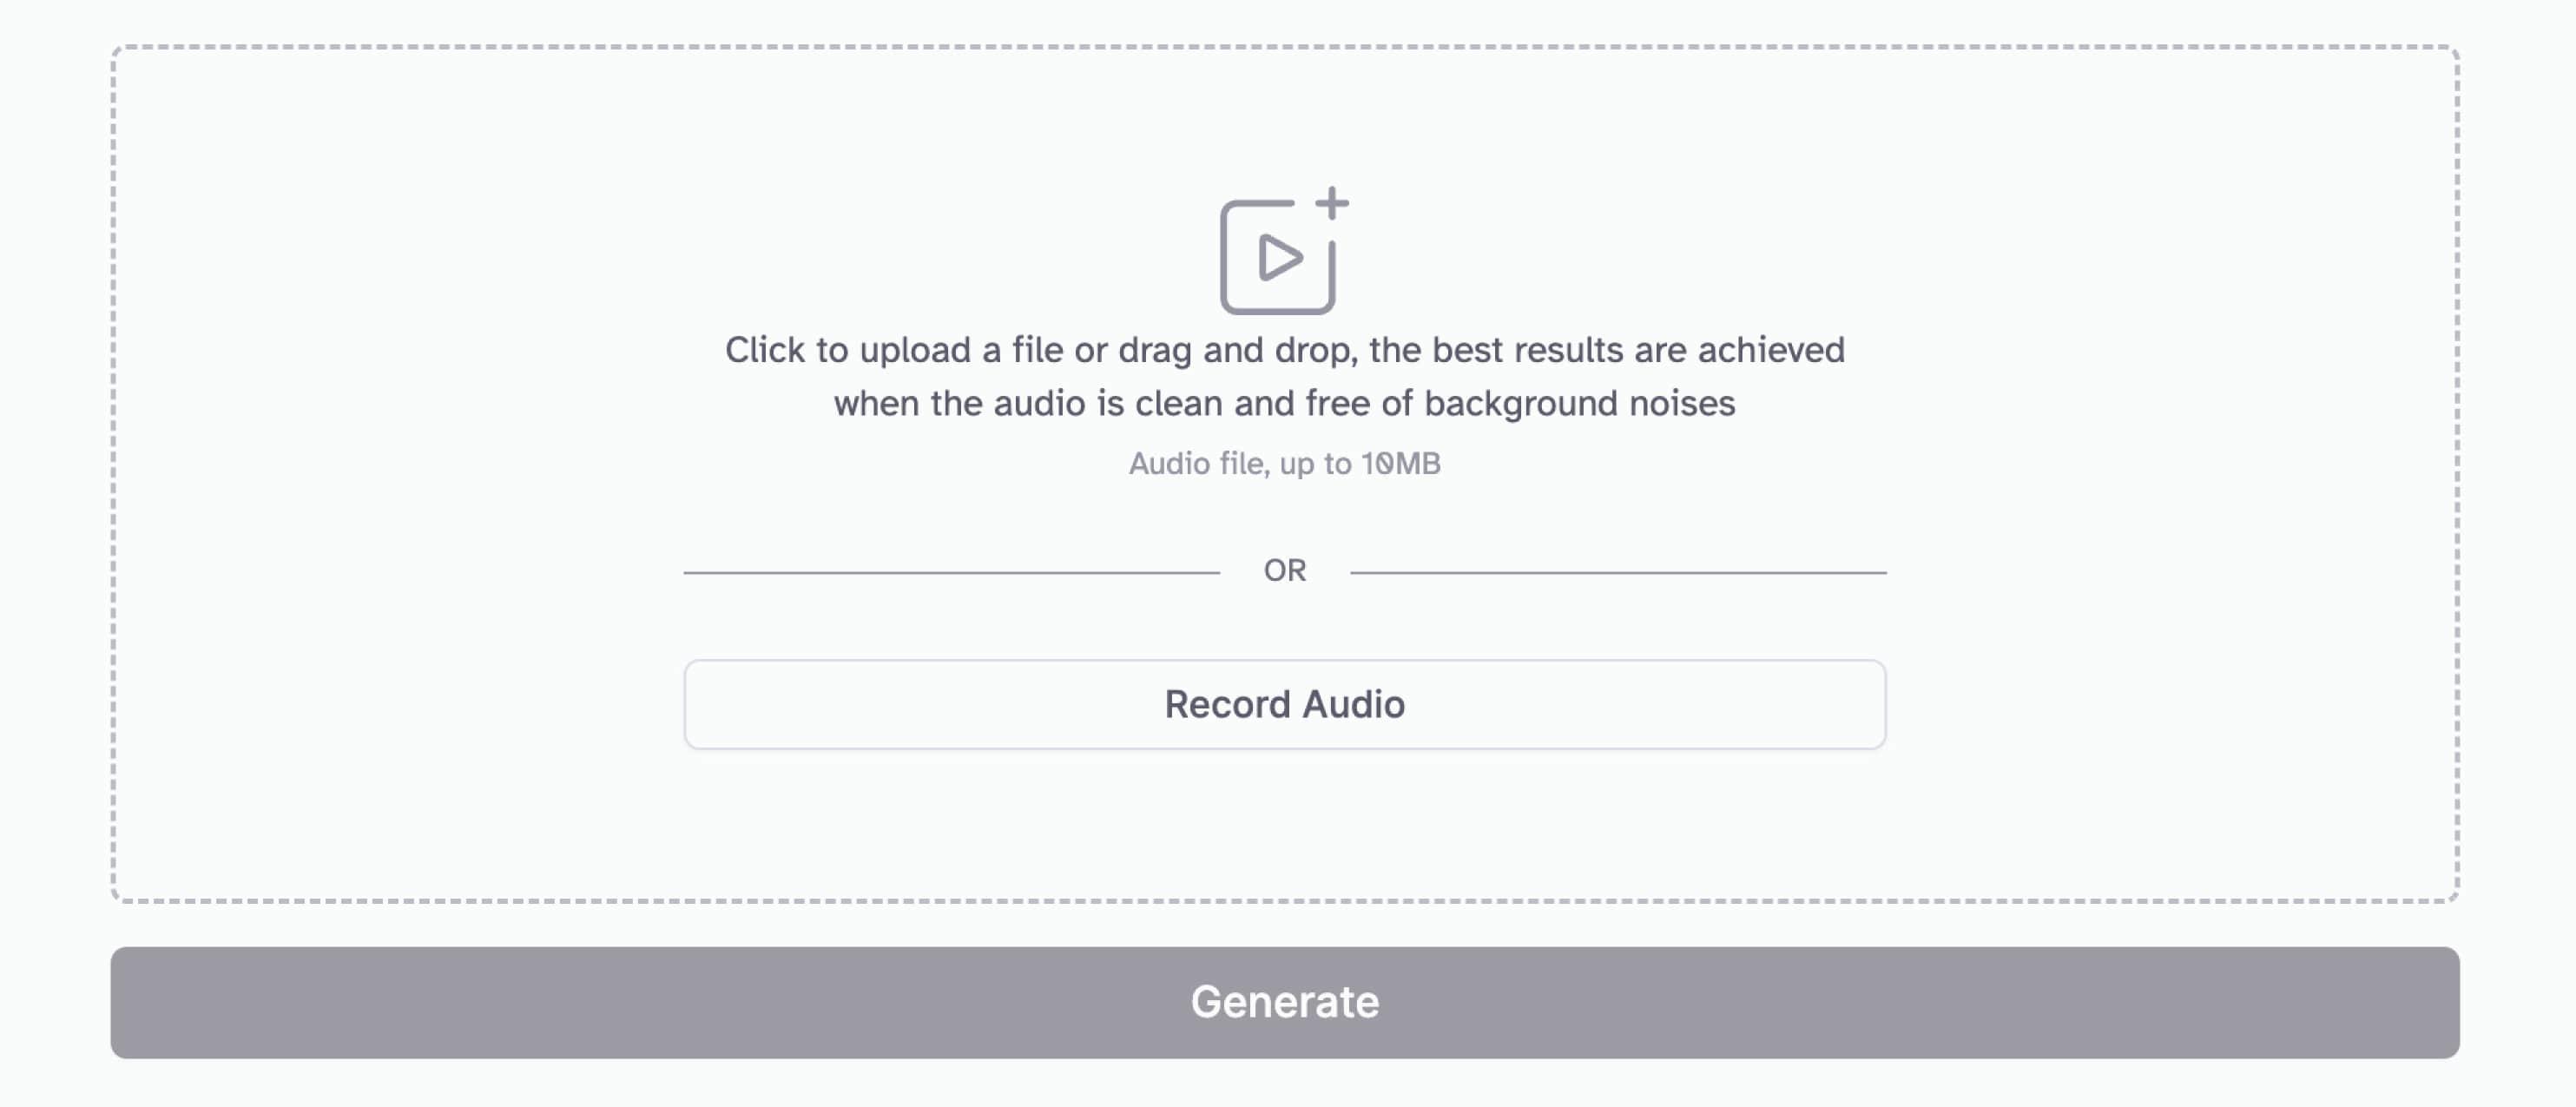 How to use the AI Voice Changer - Step 1: Upload or record your audio